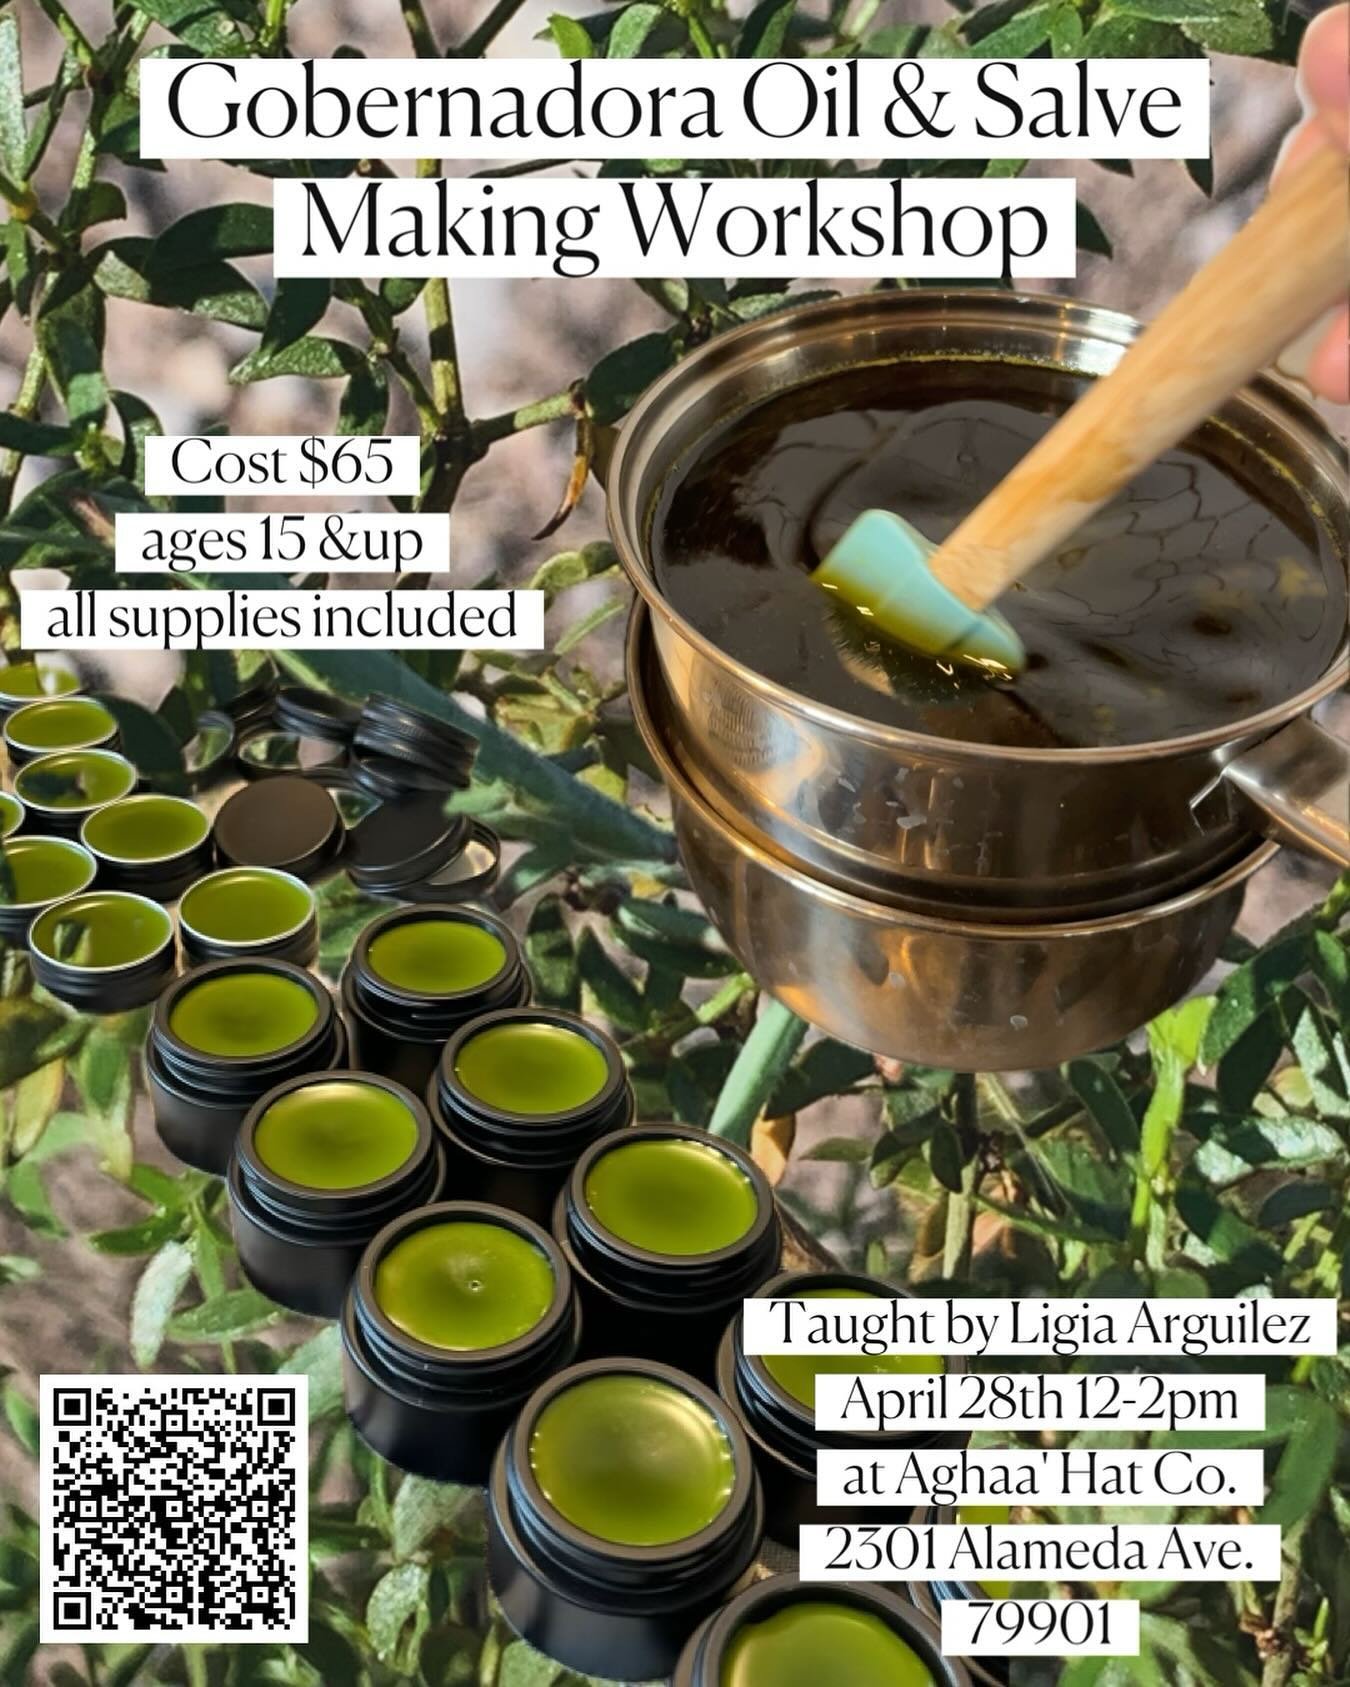 Hi all! The Gobernadora Salve &amp; Oil workshop is back. It sold out quickly the last time, so don&rsquo;t miss out on this one. Learn about the benefits of this amazing plant! 
➕Taught by Ligia Arguilez @ligiaatzimba 
➕Link in bio for info and sign